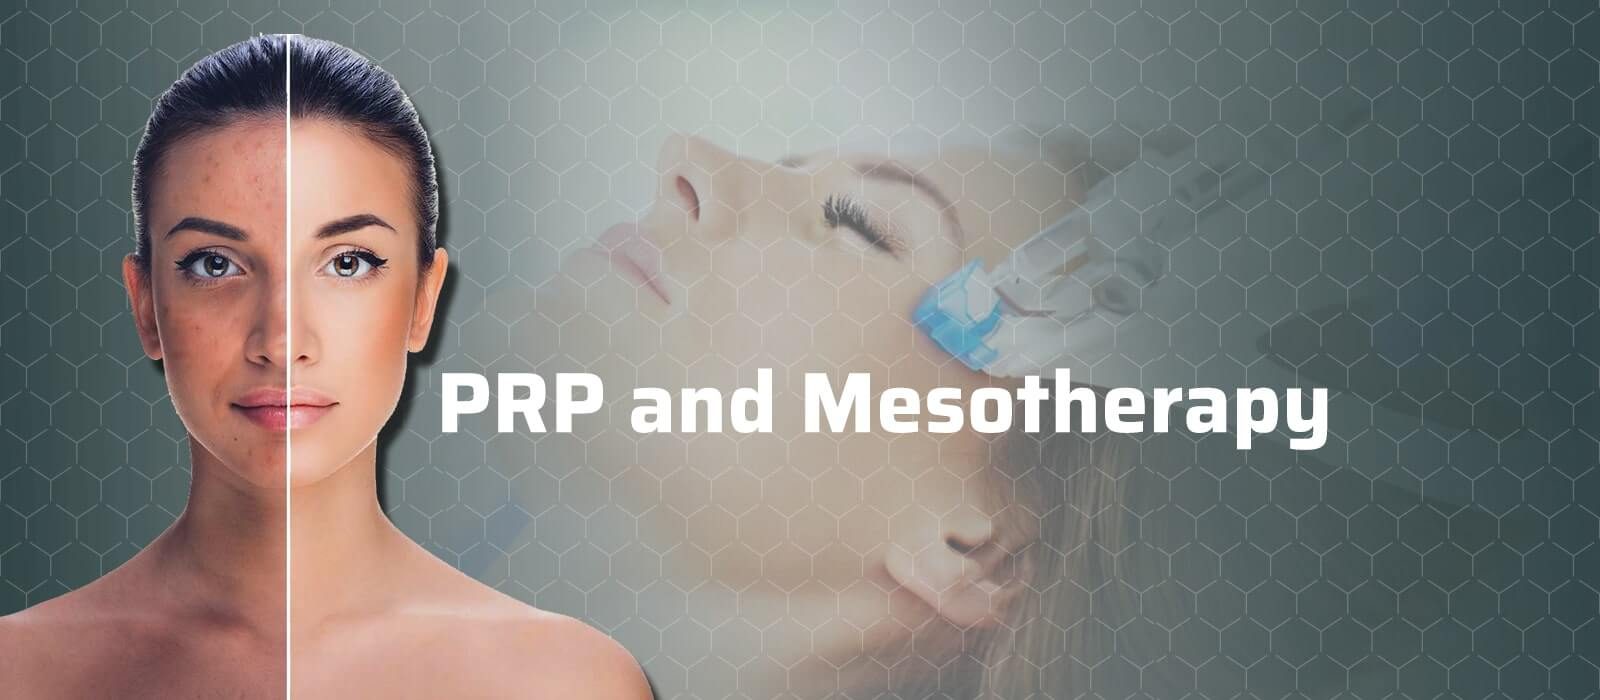 PRP and Mesotherapy